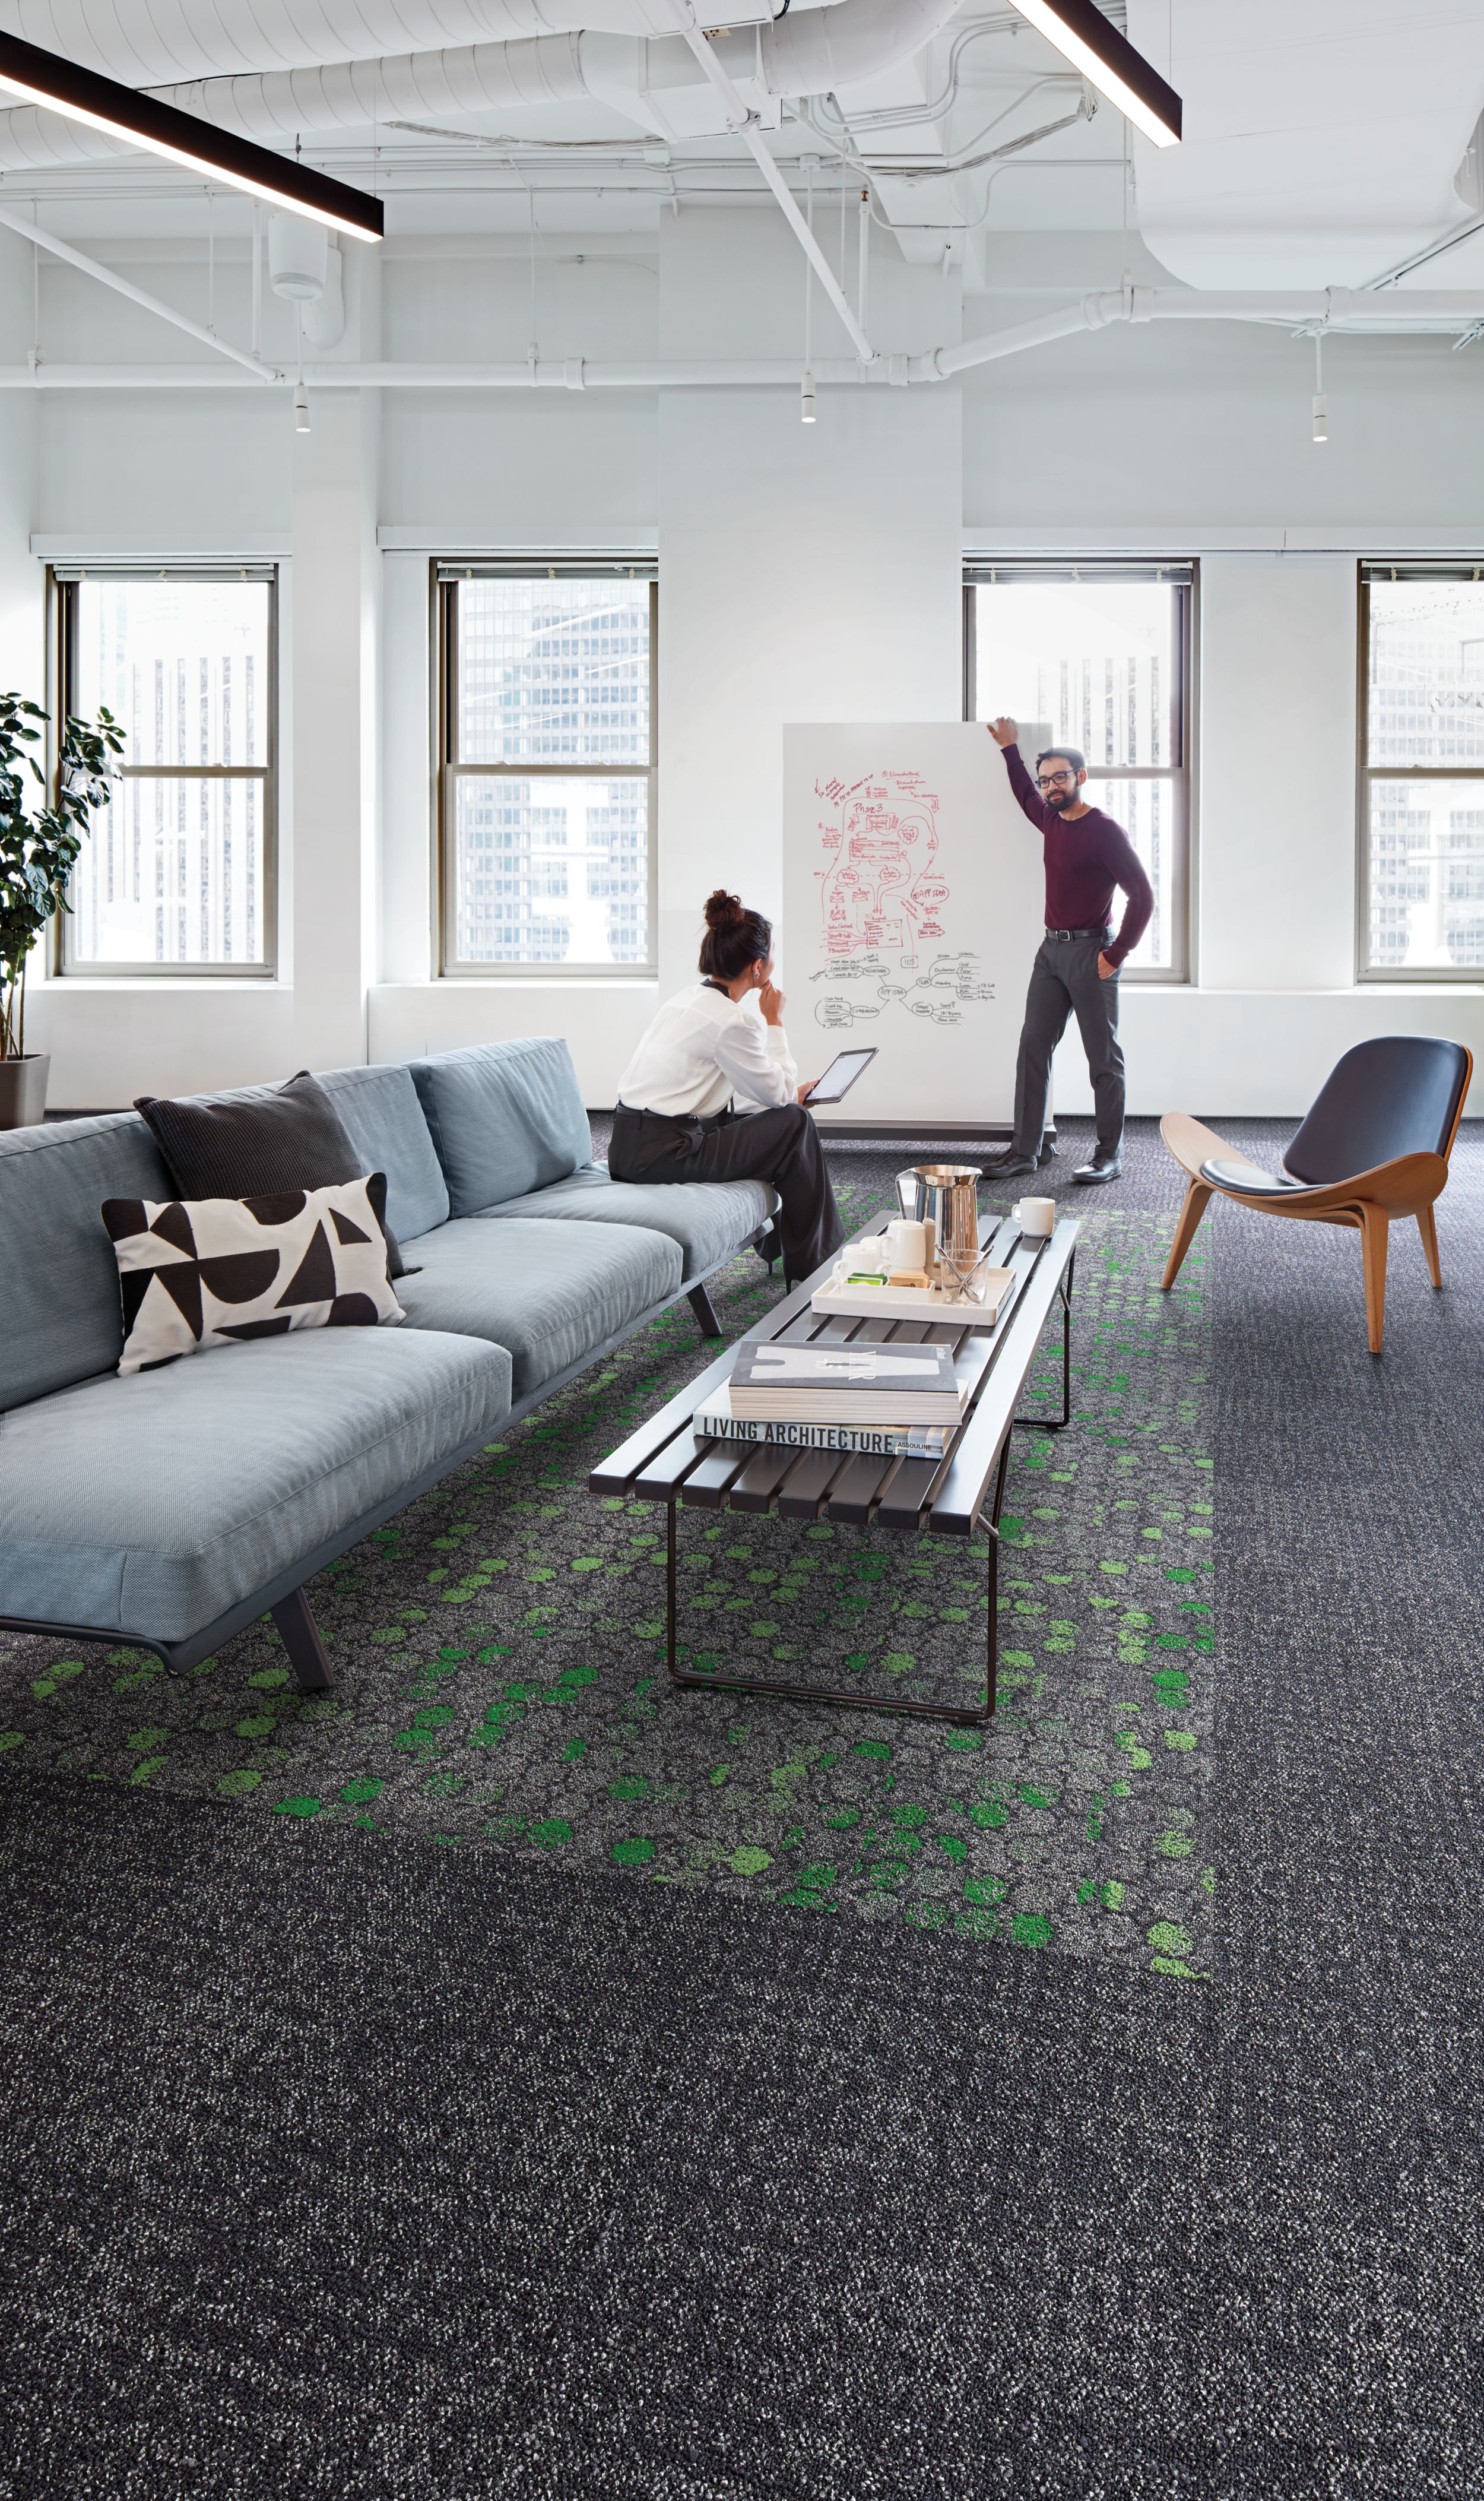 Interface Broome Street and Wheler Street in open office area with people afbeeldingnummer 10